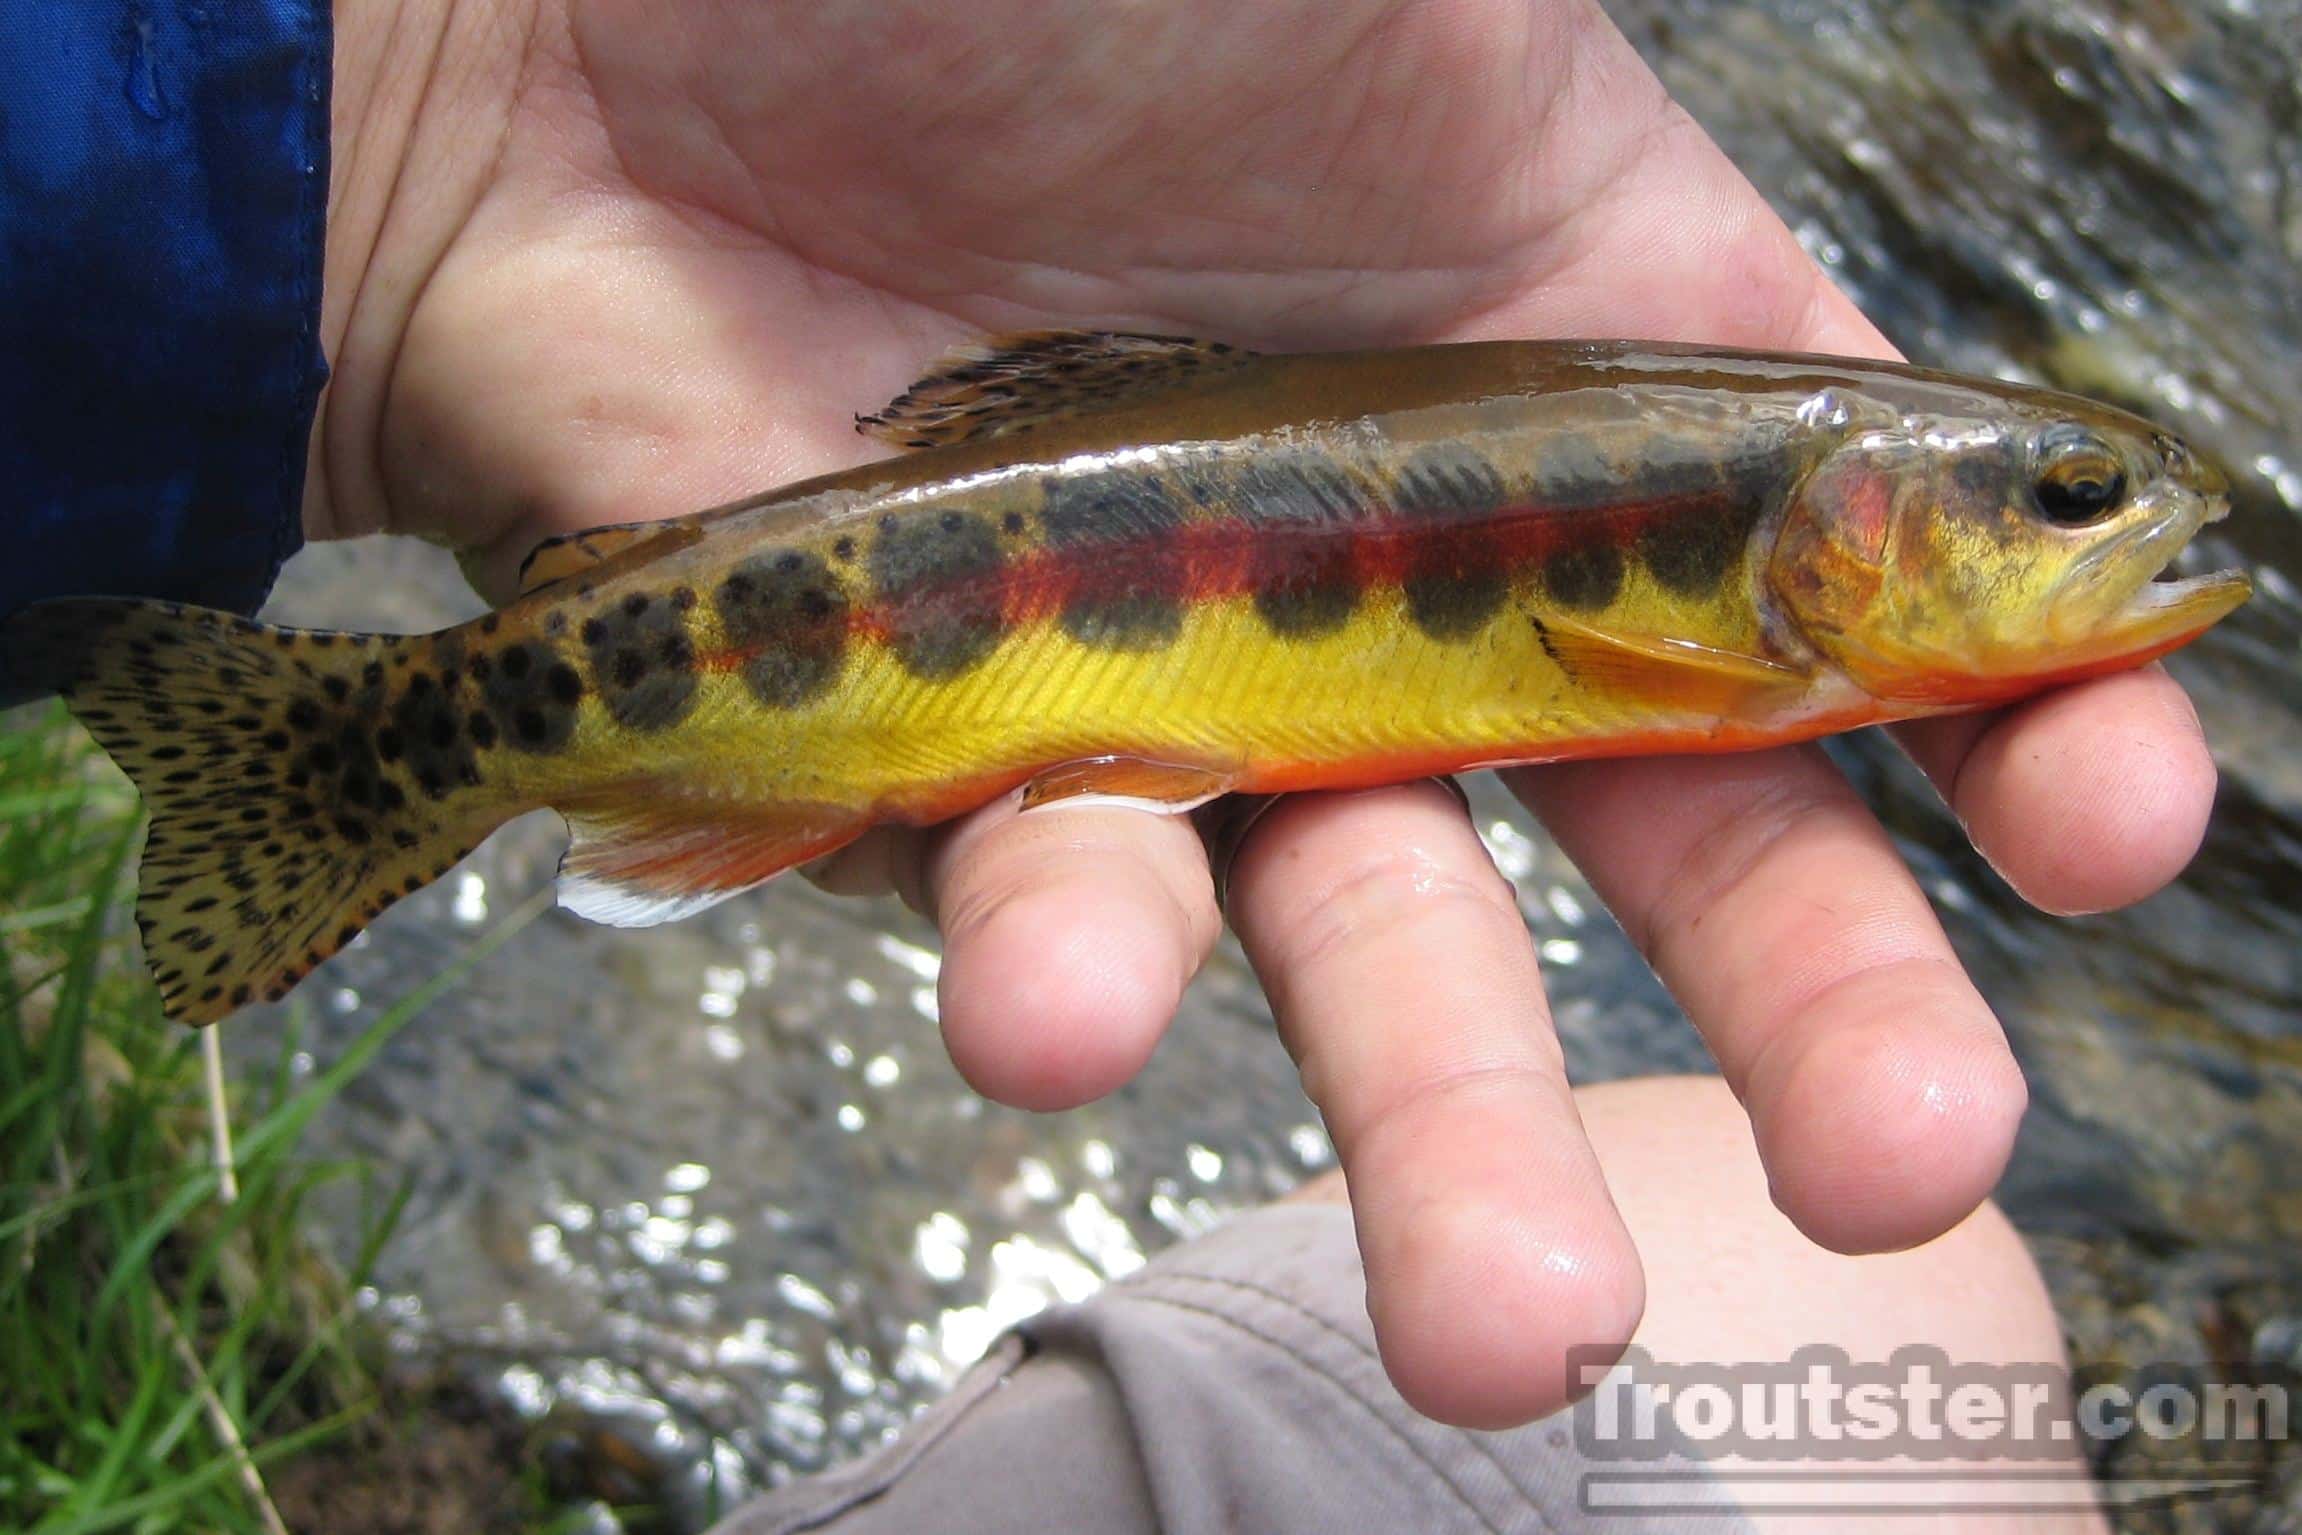 Golden Trout, Golden Trout, golden rainbow trout, how to catch golden trout, picturess of golden trout, golden trout flies, where to catch golden trout